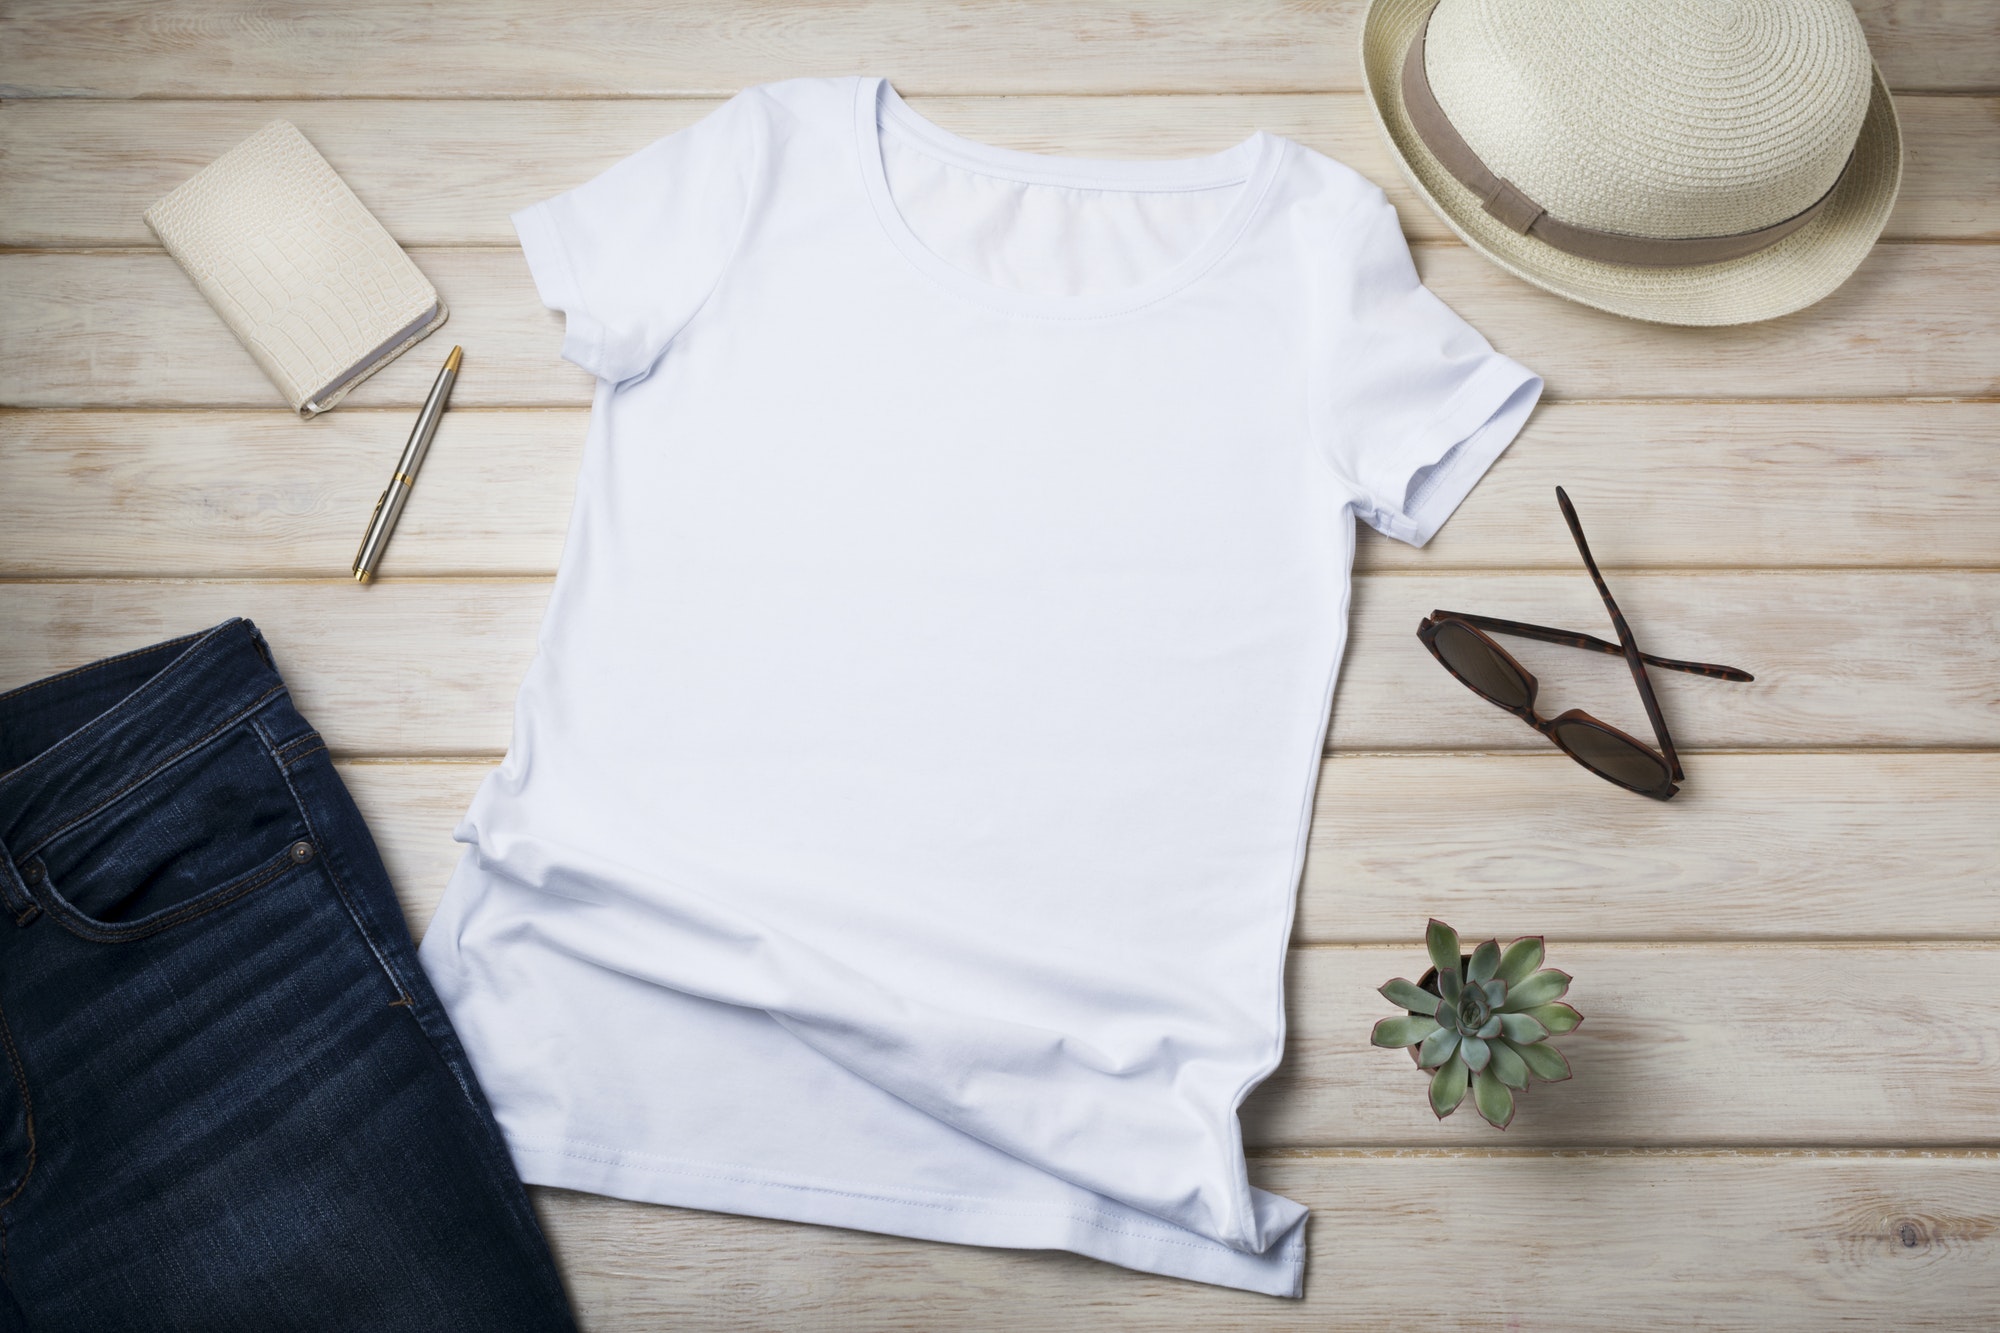 Placeit – T-shirt mockup with summer hat